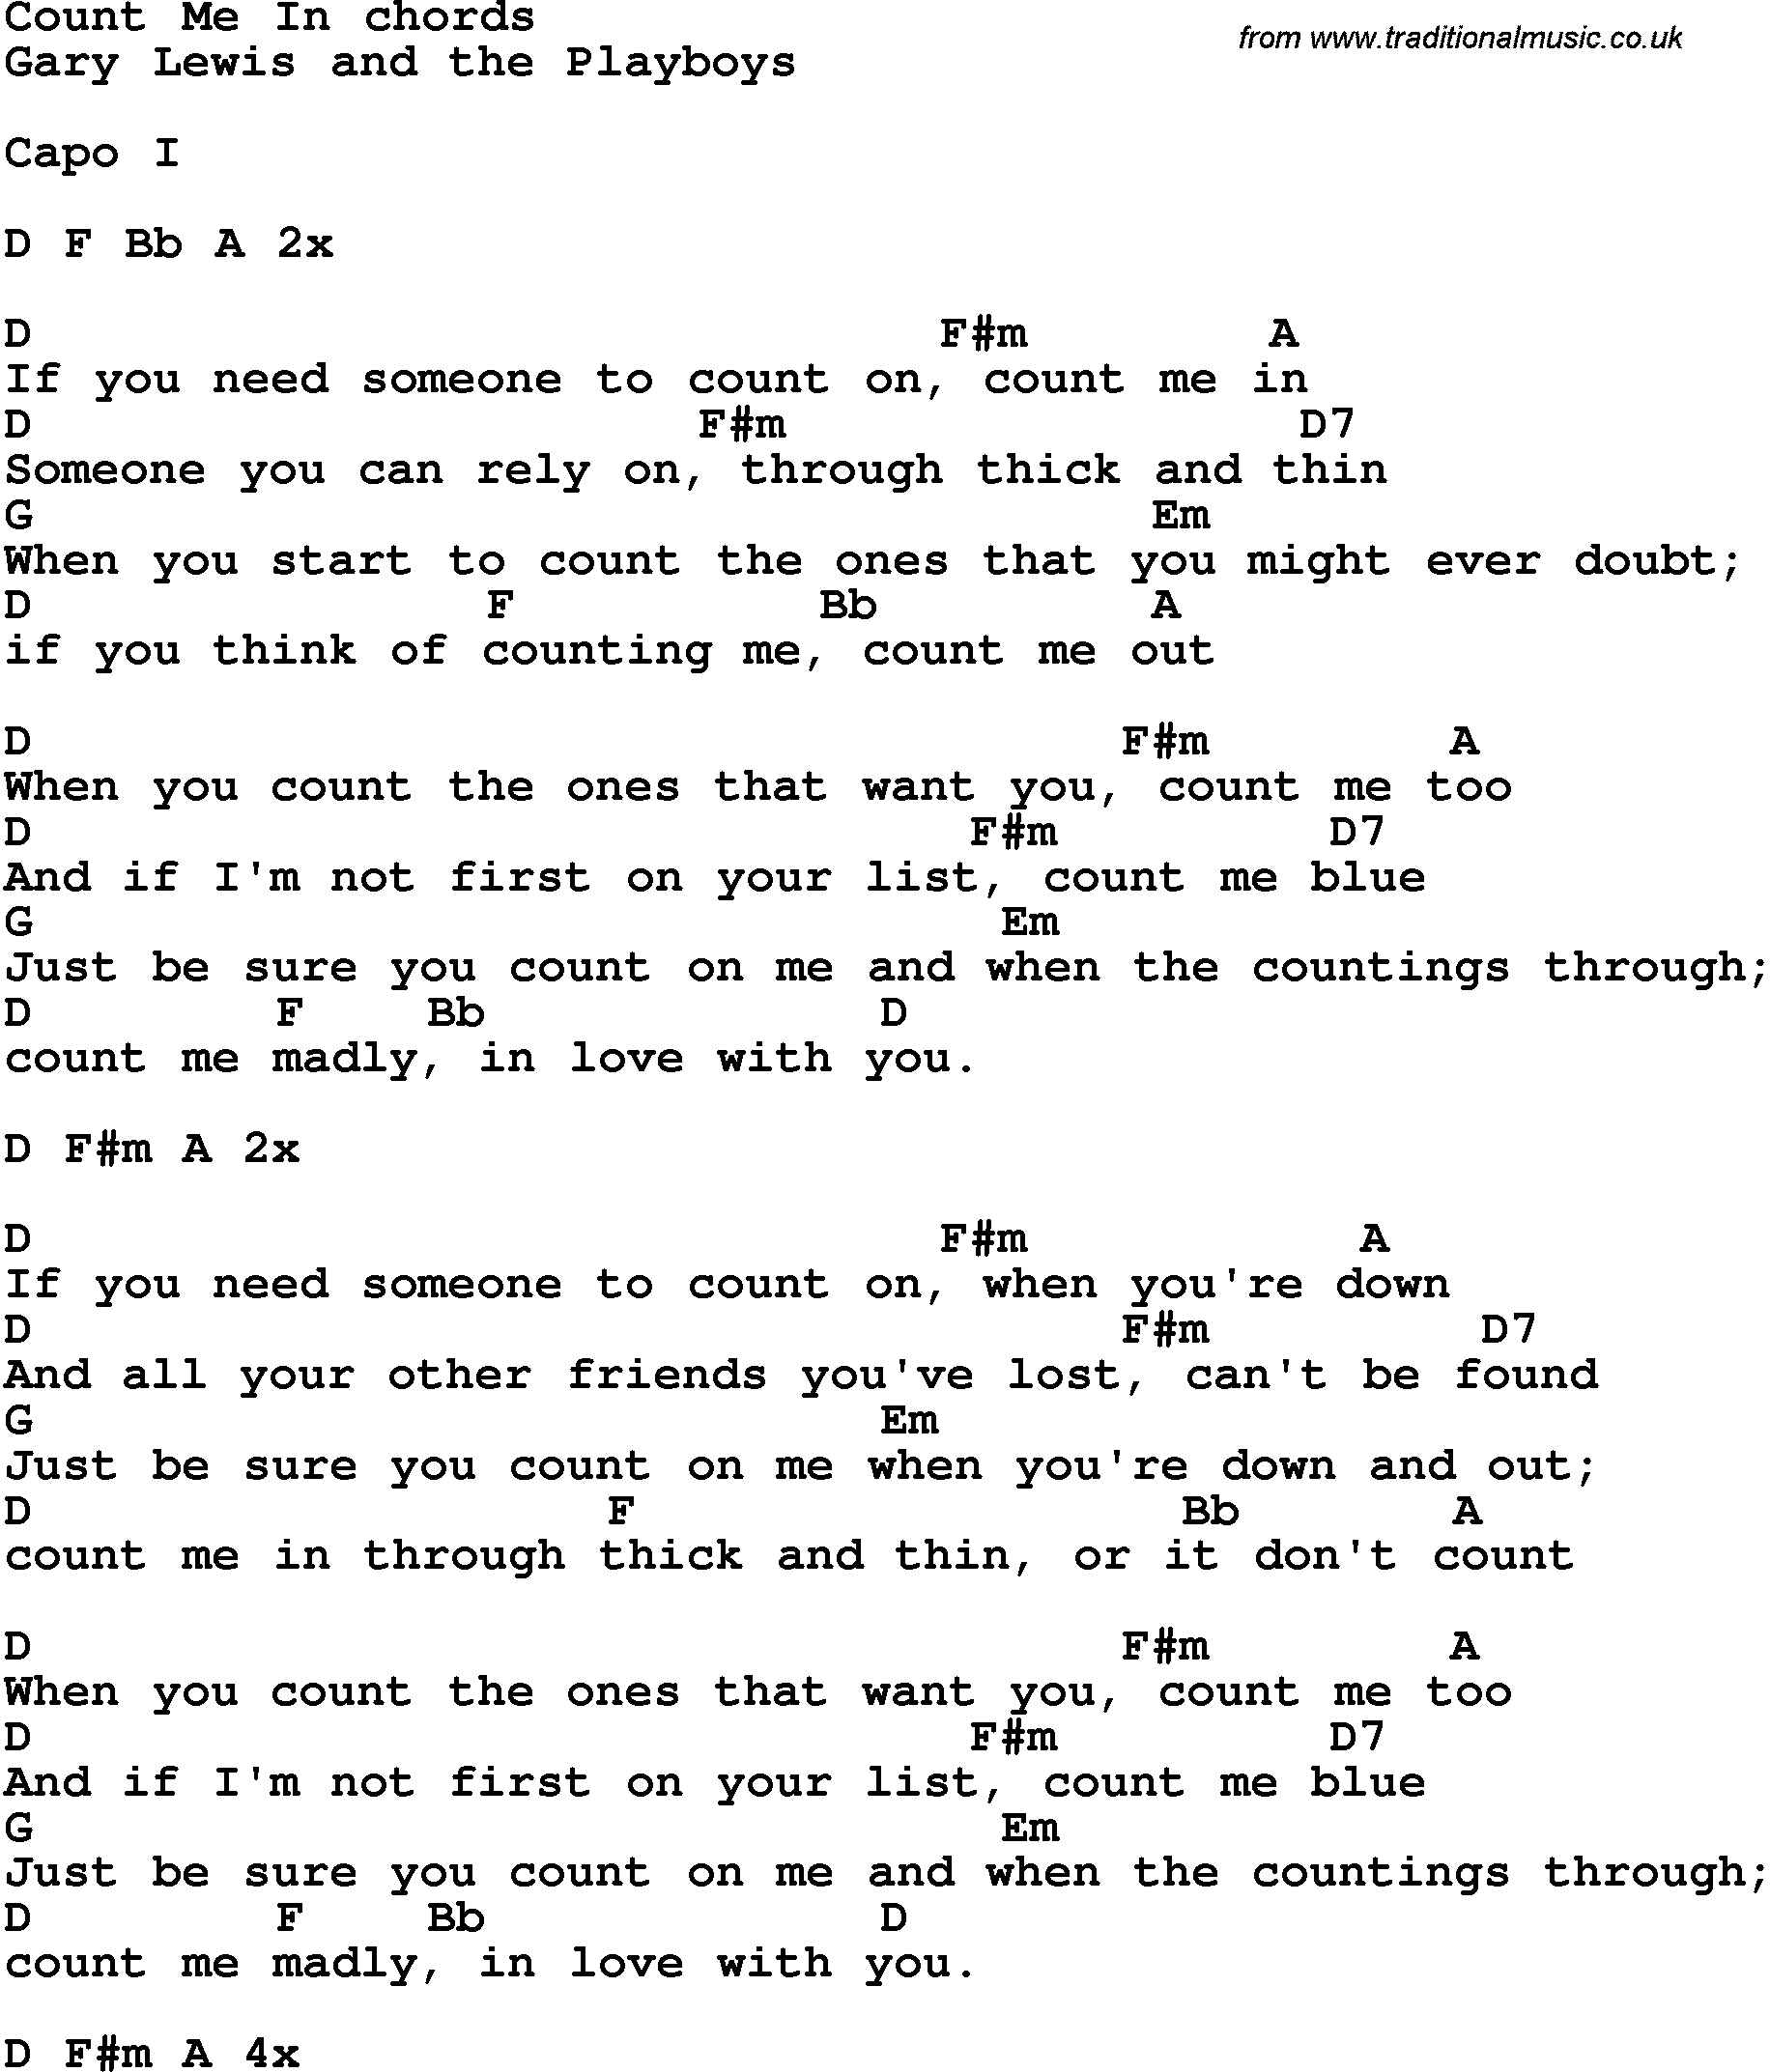 Song Lyrics with guitar chords for Count Me In